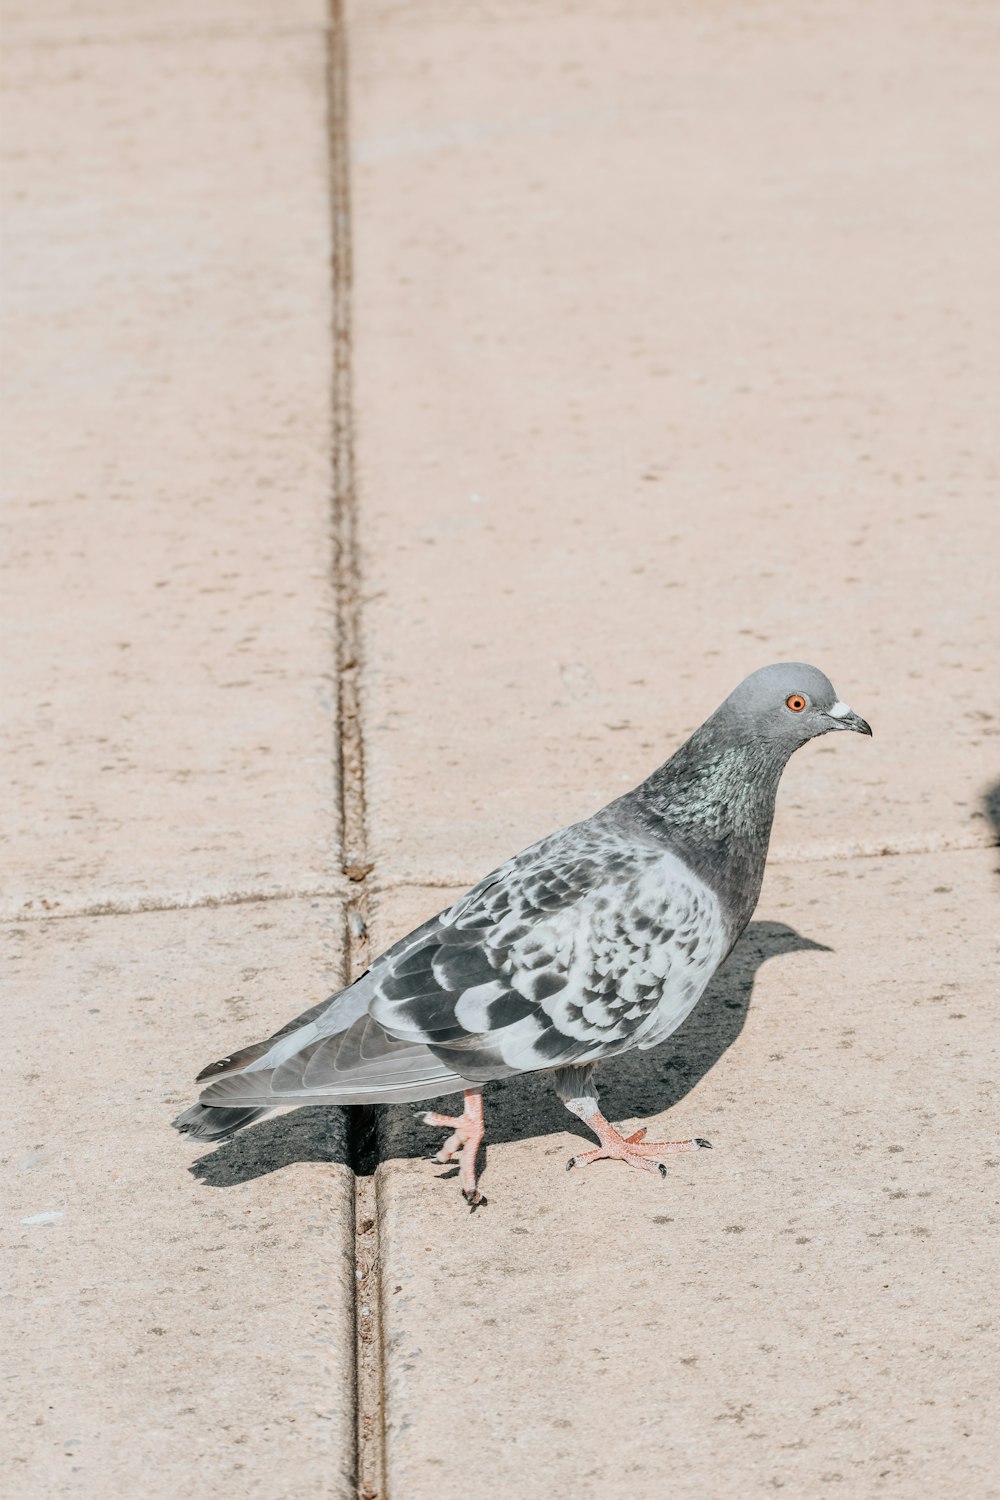 a pigeon is standing on the sidewalk looking for food